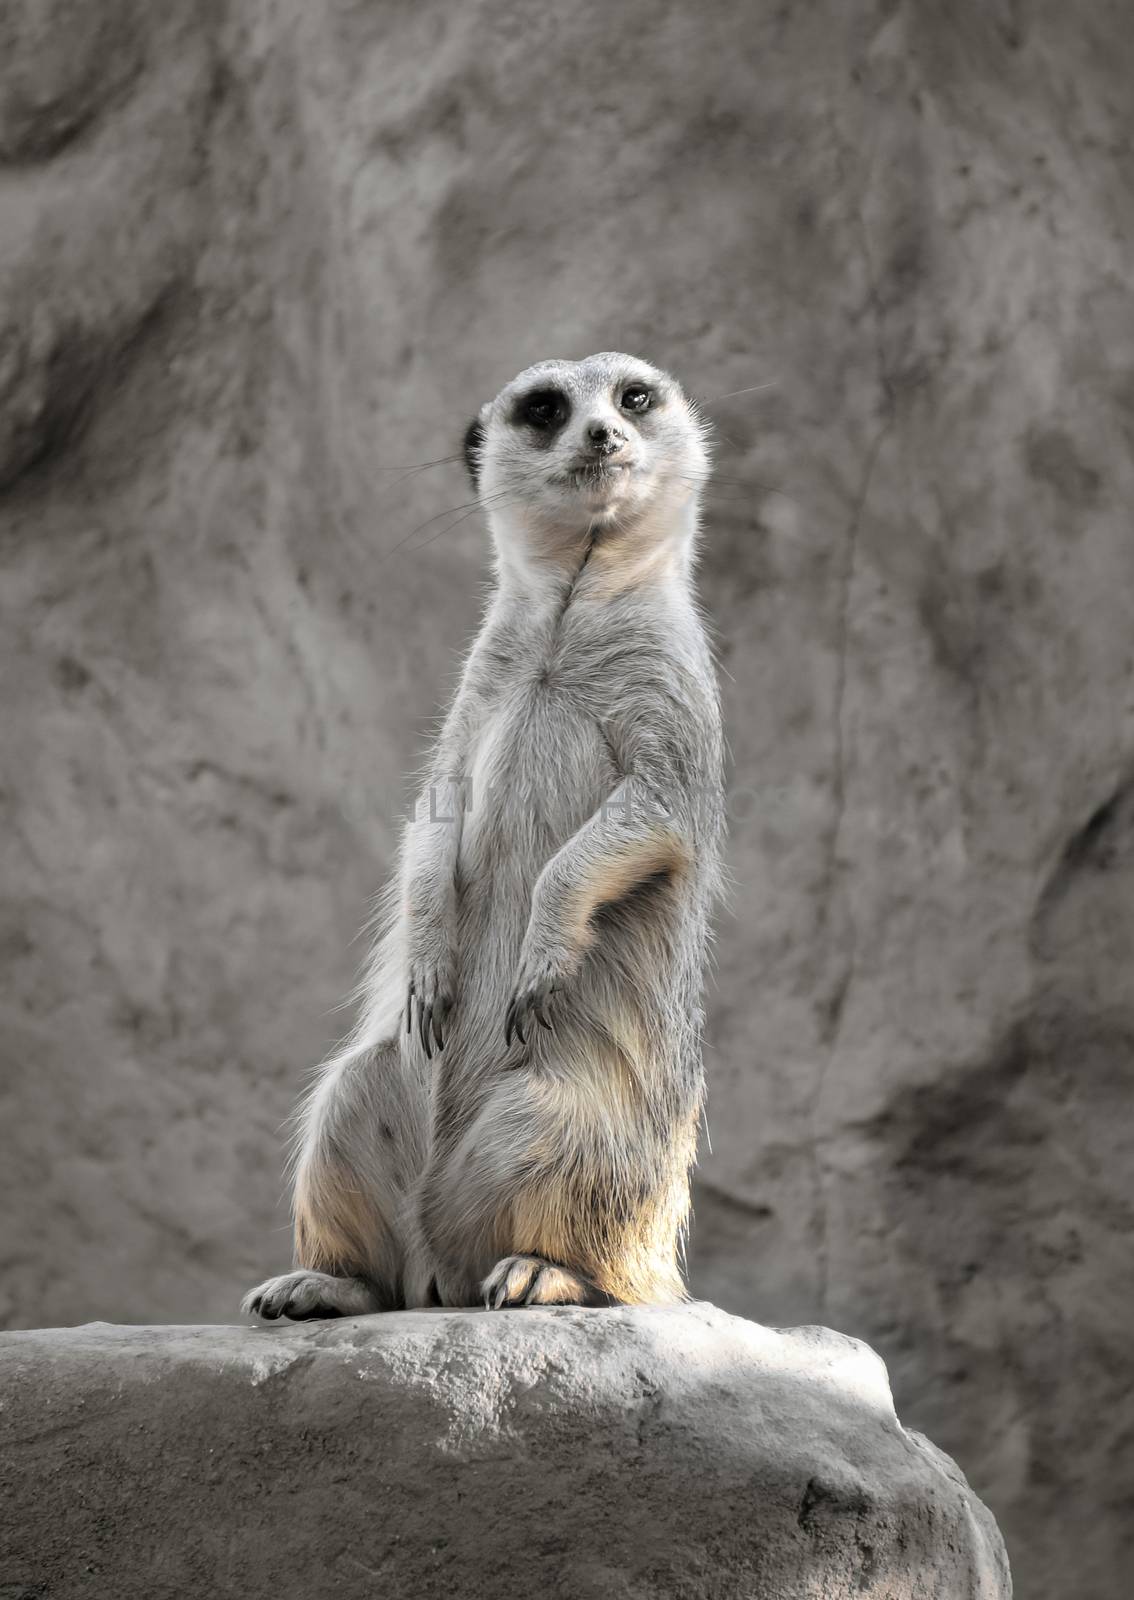 Small suricate on a rock, watching around